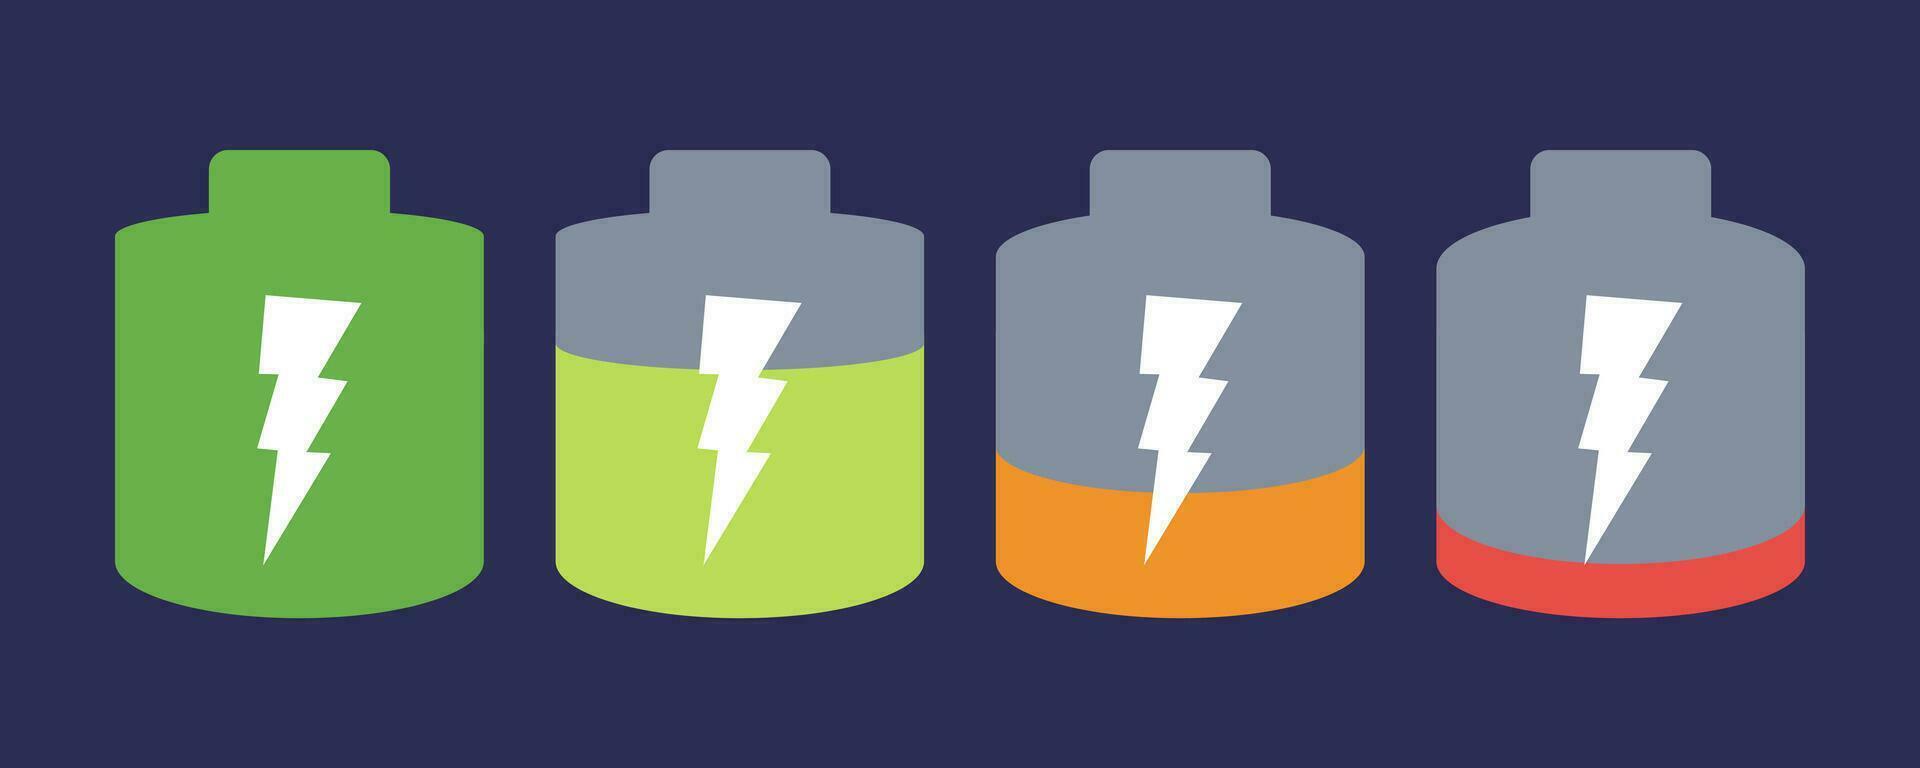 Battery power icons in a flat style, featured on a dark background, delivering visual clarity. vector